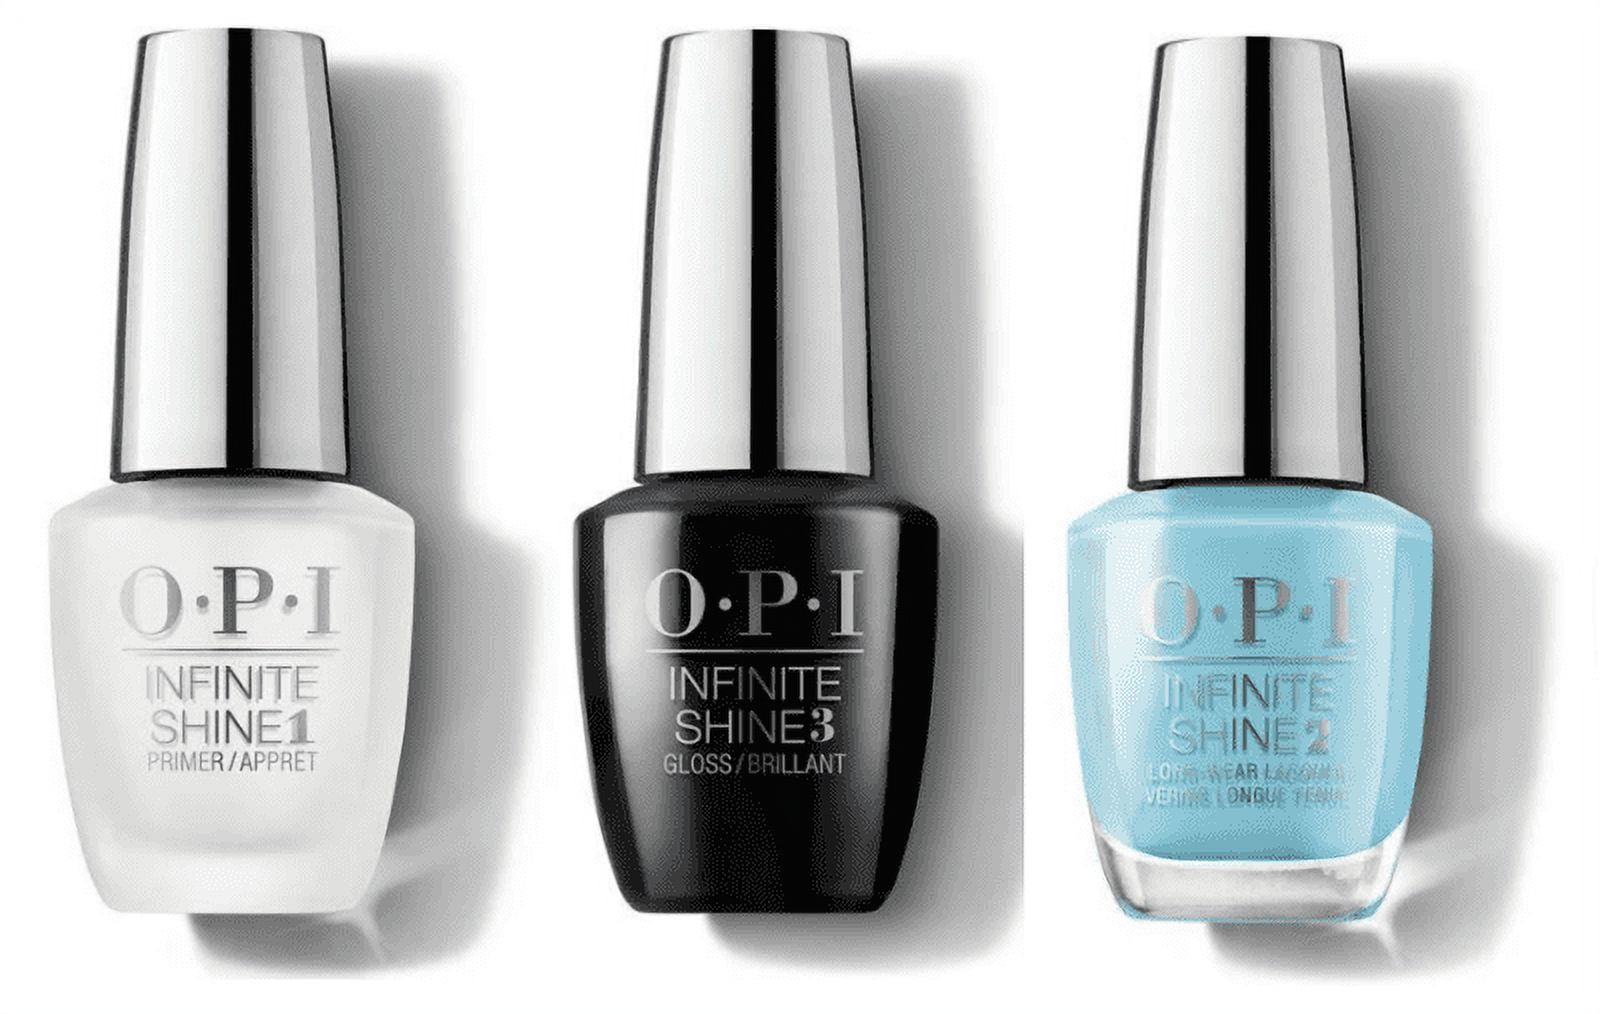 8. OPI Infinite Shine in "To Infinity & Blue-yond" - wide 2